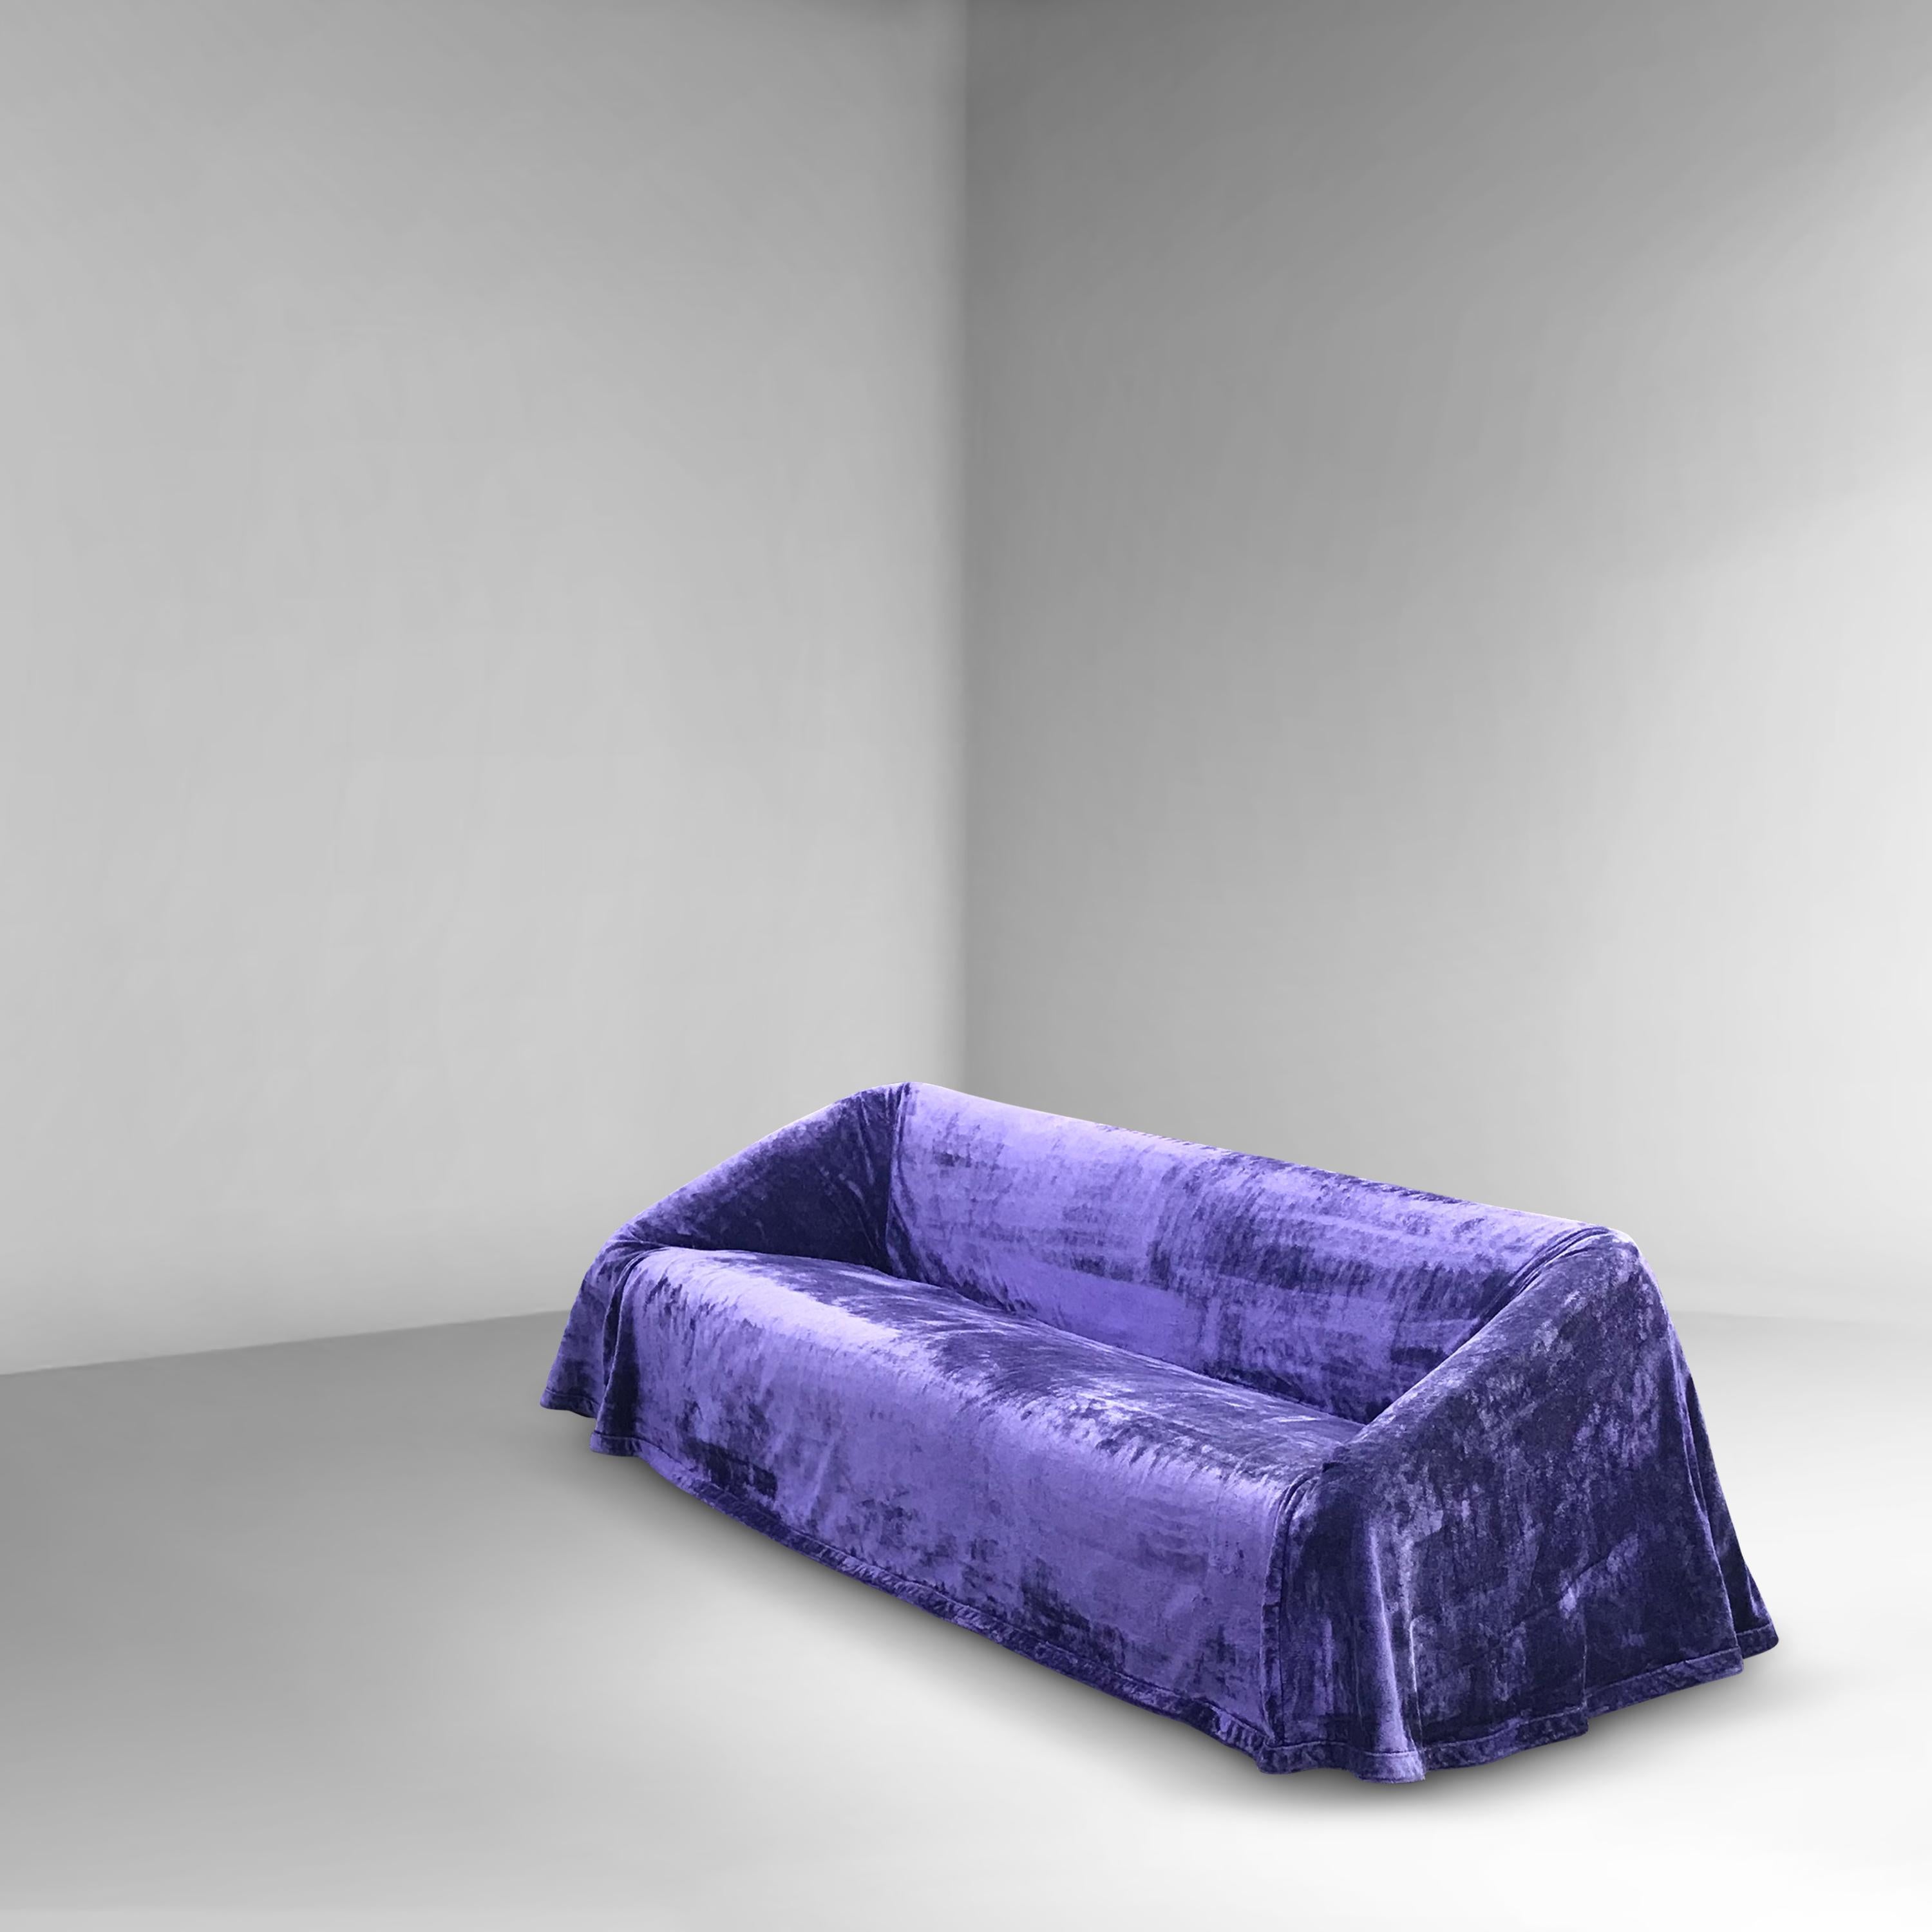 The Mantilla sofa suits the space it fits in and is designed as such. With changeable cove, it can be dressed up and easily undressed if it gets dirty, every day in a different cloak. Hence the name Mantilla, referring to its cover.

The idea comes